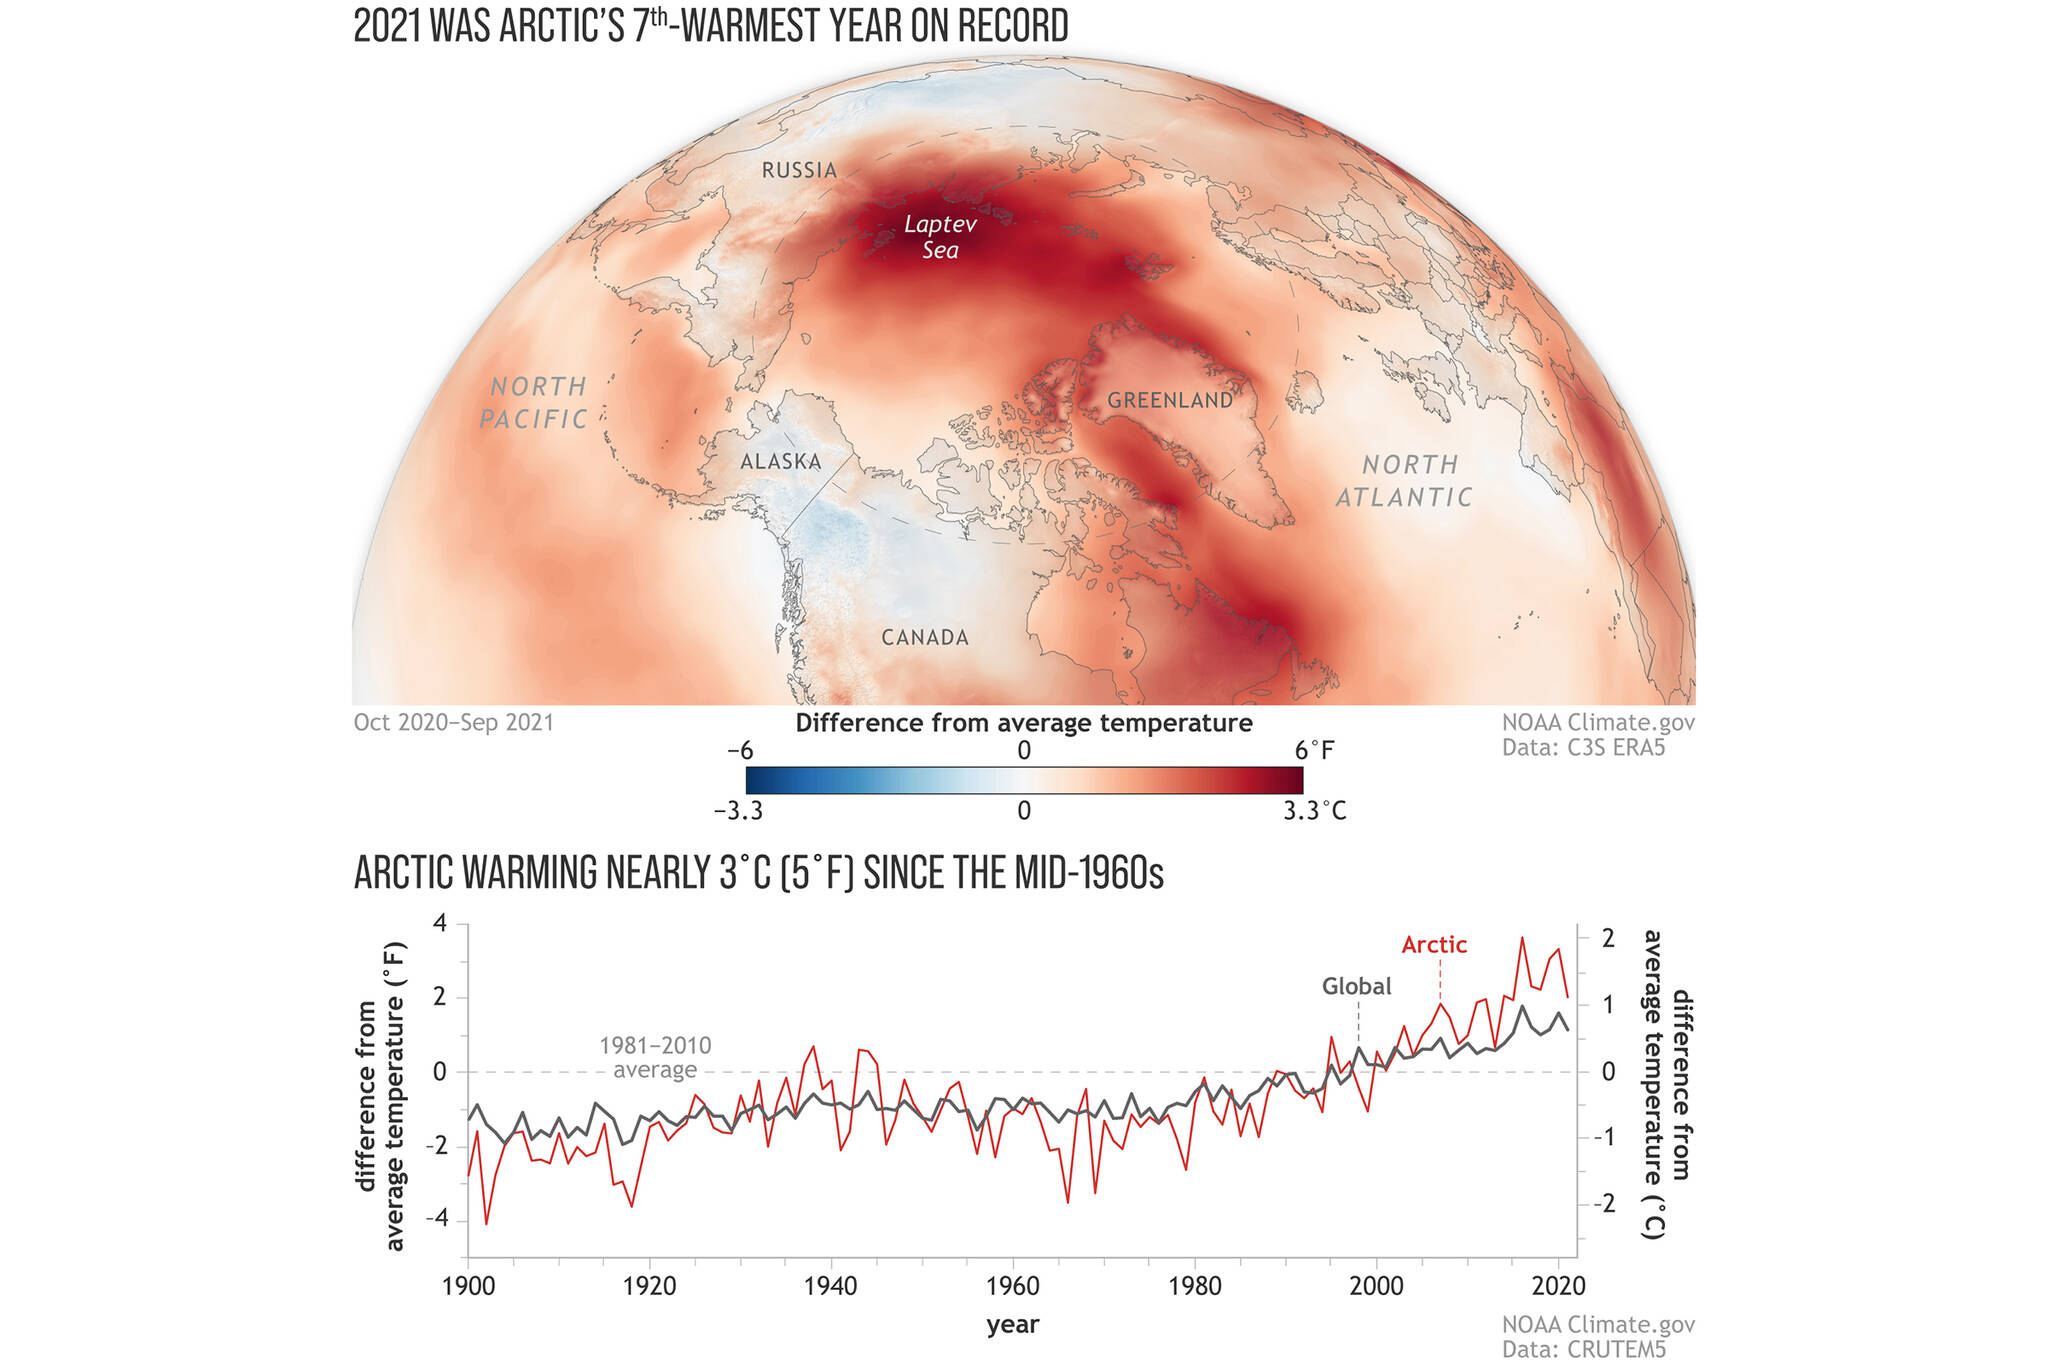 A graphic shows warming of the Arctic compared to the rest of the world. The image was released as part of NOAA’s Arctic Report Card for 2021 at the American Geophysical Union Fall Meeting in New Orleans, Dec. 14, 2021.  (Courtesy Image / NOAA climate.gov)